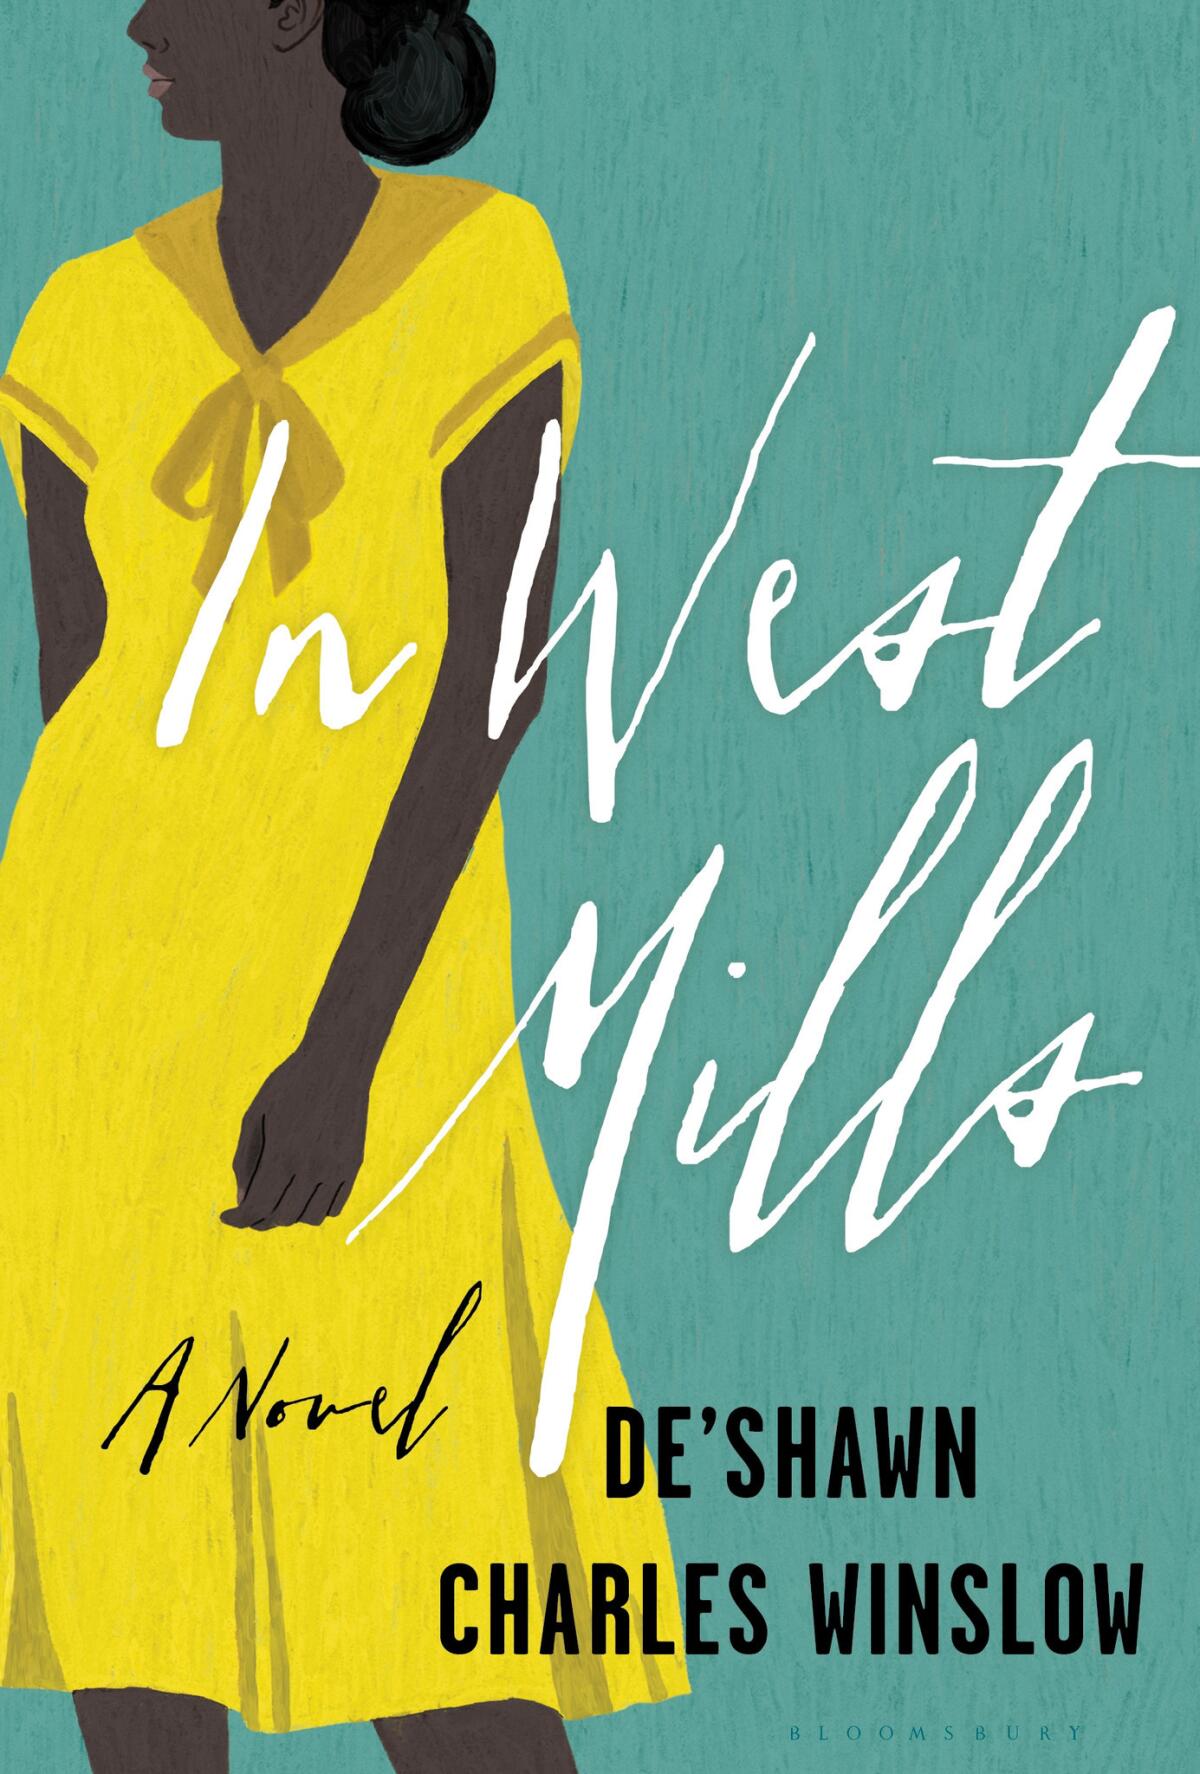 A book jacket for De’Shawn Charles Wislow’s “In West Mills.”